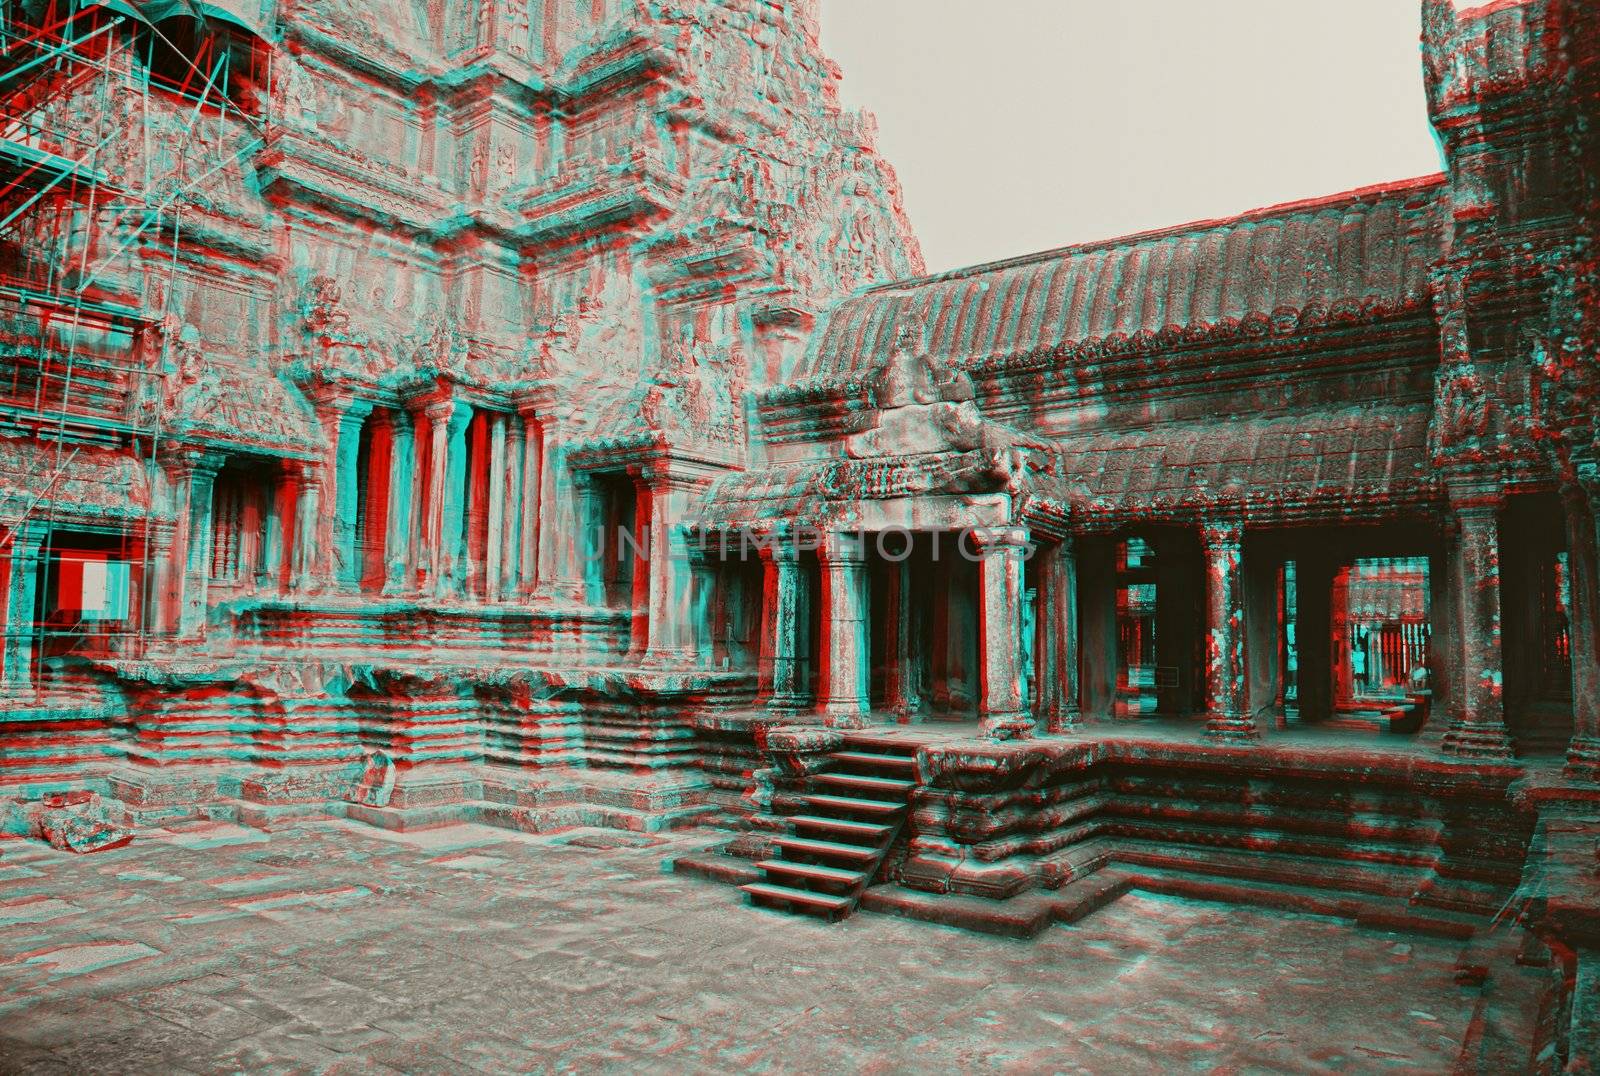 3D stereo photo Angkor Wat - ancient Khmer temple in Cambodia. UNESCO world heritage site (you need anaglyph stereo glasses to watch it)